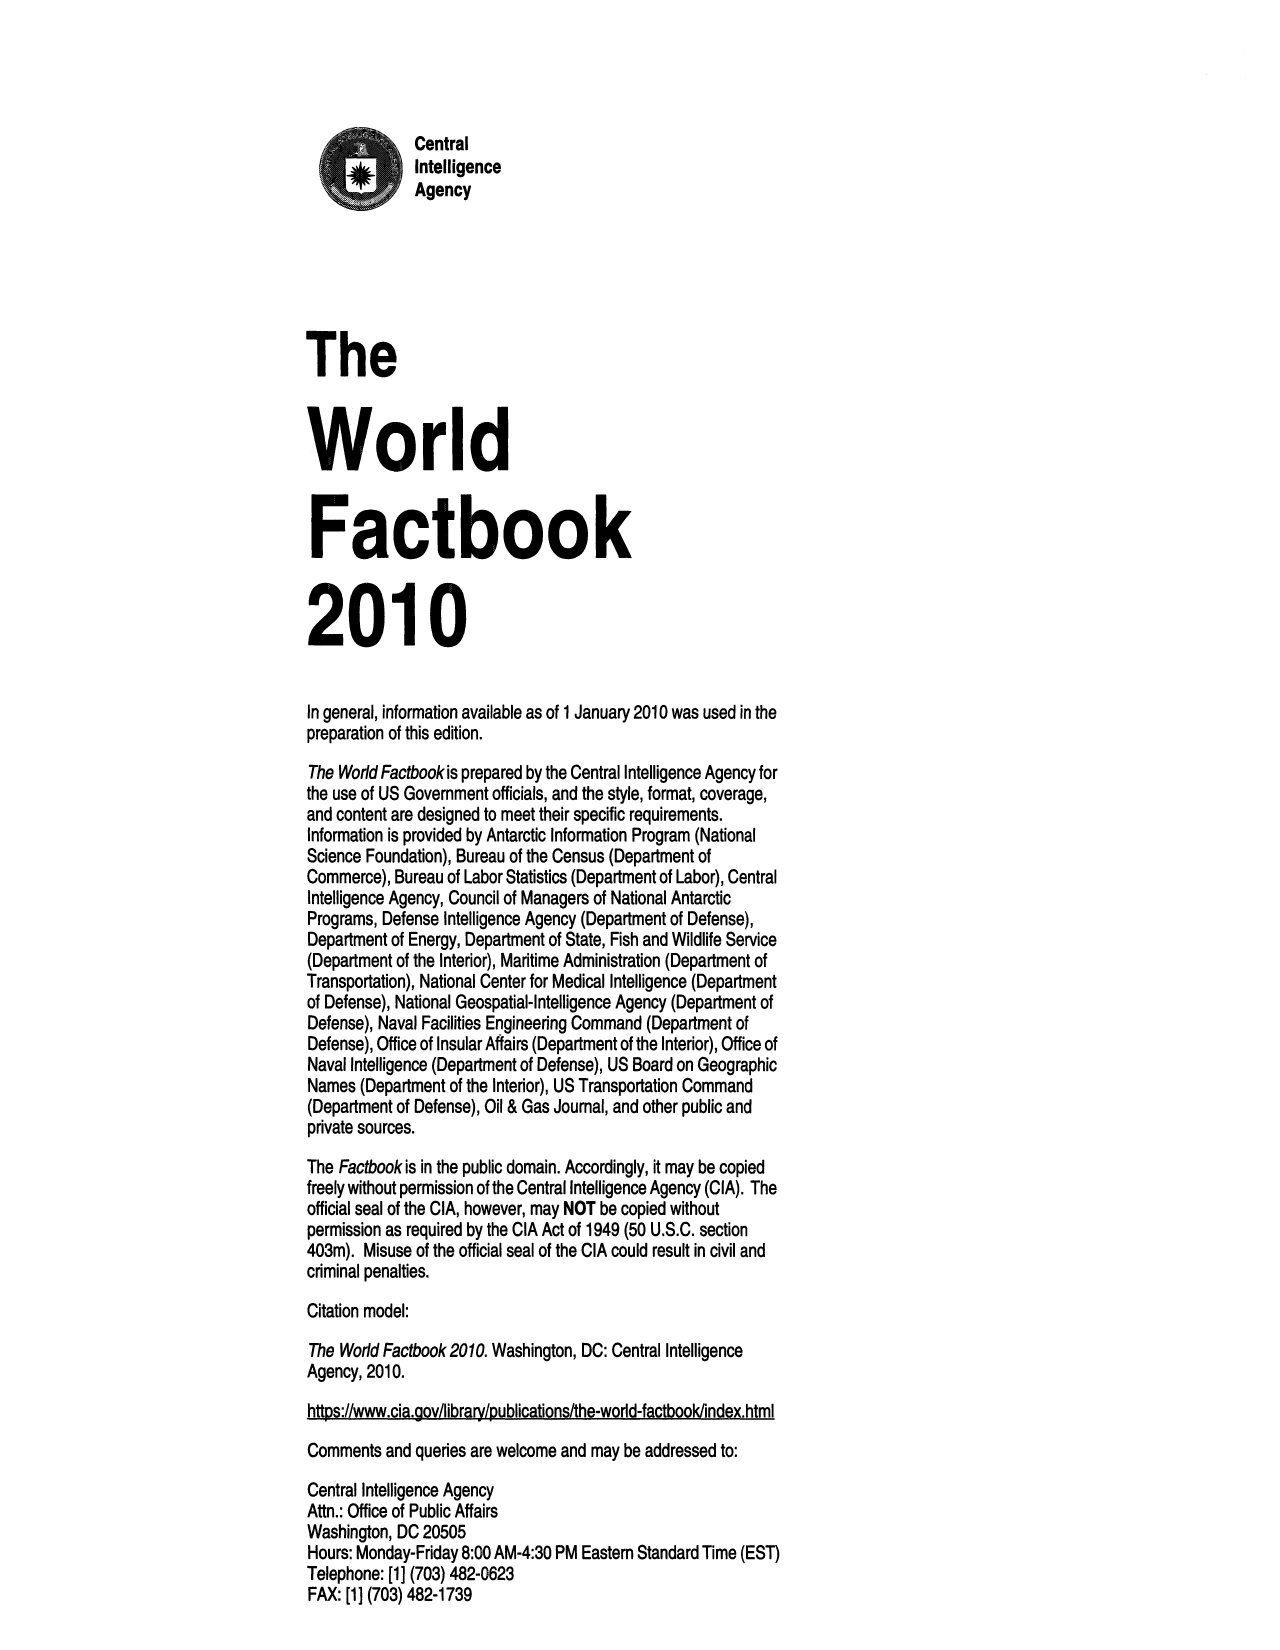 handle is hein.cow/worlfact0030 and id is 1 raw text is: Central
Intelligence
Agency
The
World
Factbook
2010
In general, information available as of 1 January 2010 was used in the
preparation of this edition.
The World Factbookis prepared by the Central Intelligence Agency for
the use of US Government officials, and the style, format, coverage,
and content are designed to meet their specific requirements.
Information is provided by Antarctic Information Program (National
Science Foundation), Bureau of the Census (Department of
Commerce), Bureau of Labor Statistics (Department of Labor), Central
Intelligence Agency, Council of Managers of National Antarctic
Programs, Defense Intelligence Agency (Department of Defense),
Department of Energy, Department of State, Fish and Wildlife Service
(Department of the Interior), Maritime Administration (Department of
Transportation), National Center for Medical Intelligence (Department
of Defense), National Geospatial-Intelligence Agency (Department of
Defense), Naval Facilities Engineering Command (Department of
Defense), Office of Insular Affairs (Department of the Interior), Office of
Naval Intelligence (Department of Defense), US Board on Geographic
Names (Department of the Interior), US Transportation Command
(Department of Defense), Oil & Gas Joumal, and other public and
private sources.
The Factbook is in the public domain. Accordingly, it may be copied
freely without permission of the Central Intelligence Agency (CIA). The
official seal of the CIA, however, may NOT be copied without
permission as required by the CIA Act of 1949 (50 U.S.C. section
403m). Misuse of the official seal of the CIA could result in civil and
criminal penalties.
Citation model:
The World Factbook 2010. Washington, DC: Central Intelligence
Agency, 2010.
https://www.cia.govlibrary/publications/the-world-factbookindex.html
Comments and queries are welcome and may be addressed to:
Central Intelligence Agency
Attn.: Office of Public Affairs

Washington, DC 20505
Hours: Monday-Friday 8:00 AM-4:30 PM Eastem Standard Time (EST)
Telephone: [1] (703) 482-0623
FAX: [1] (703) 482-1739


